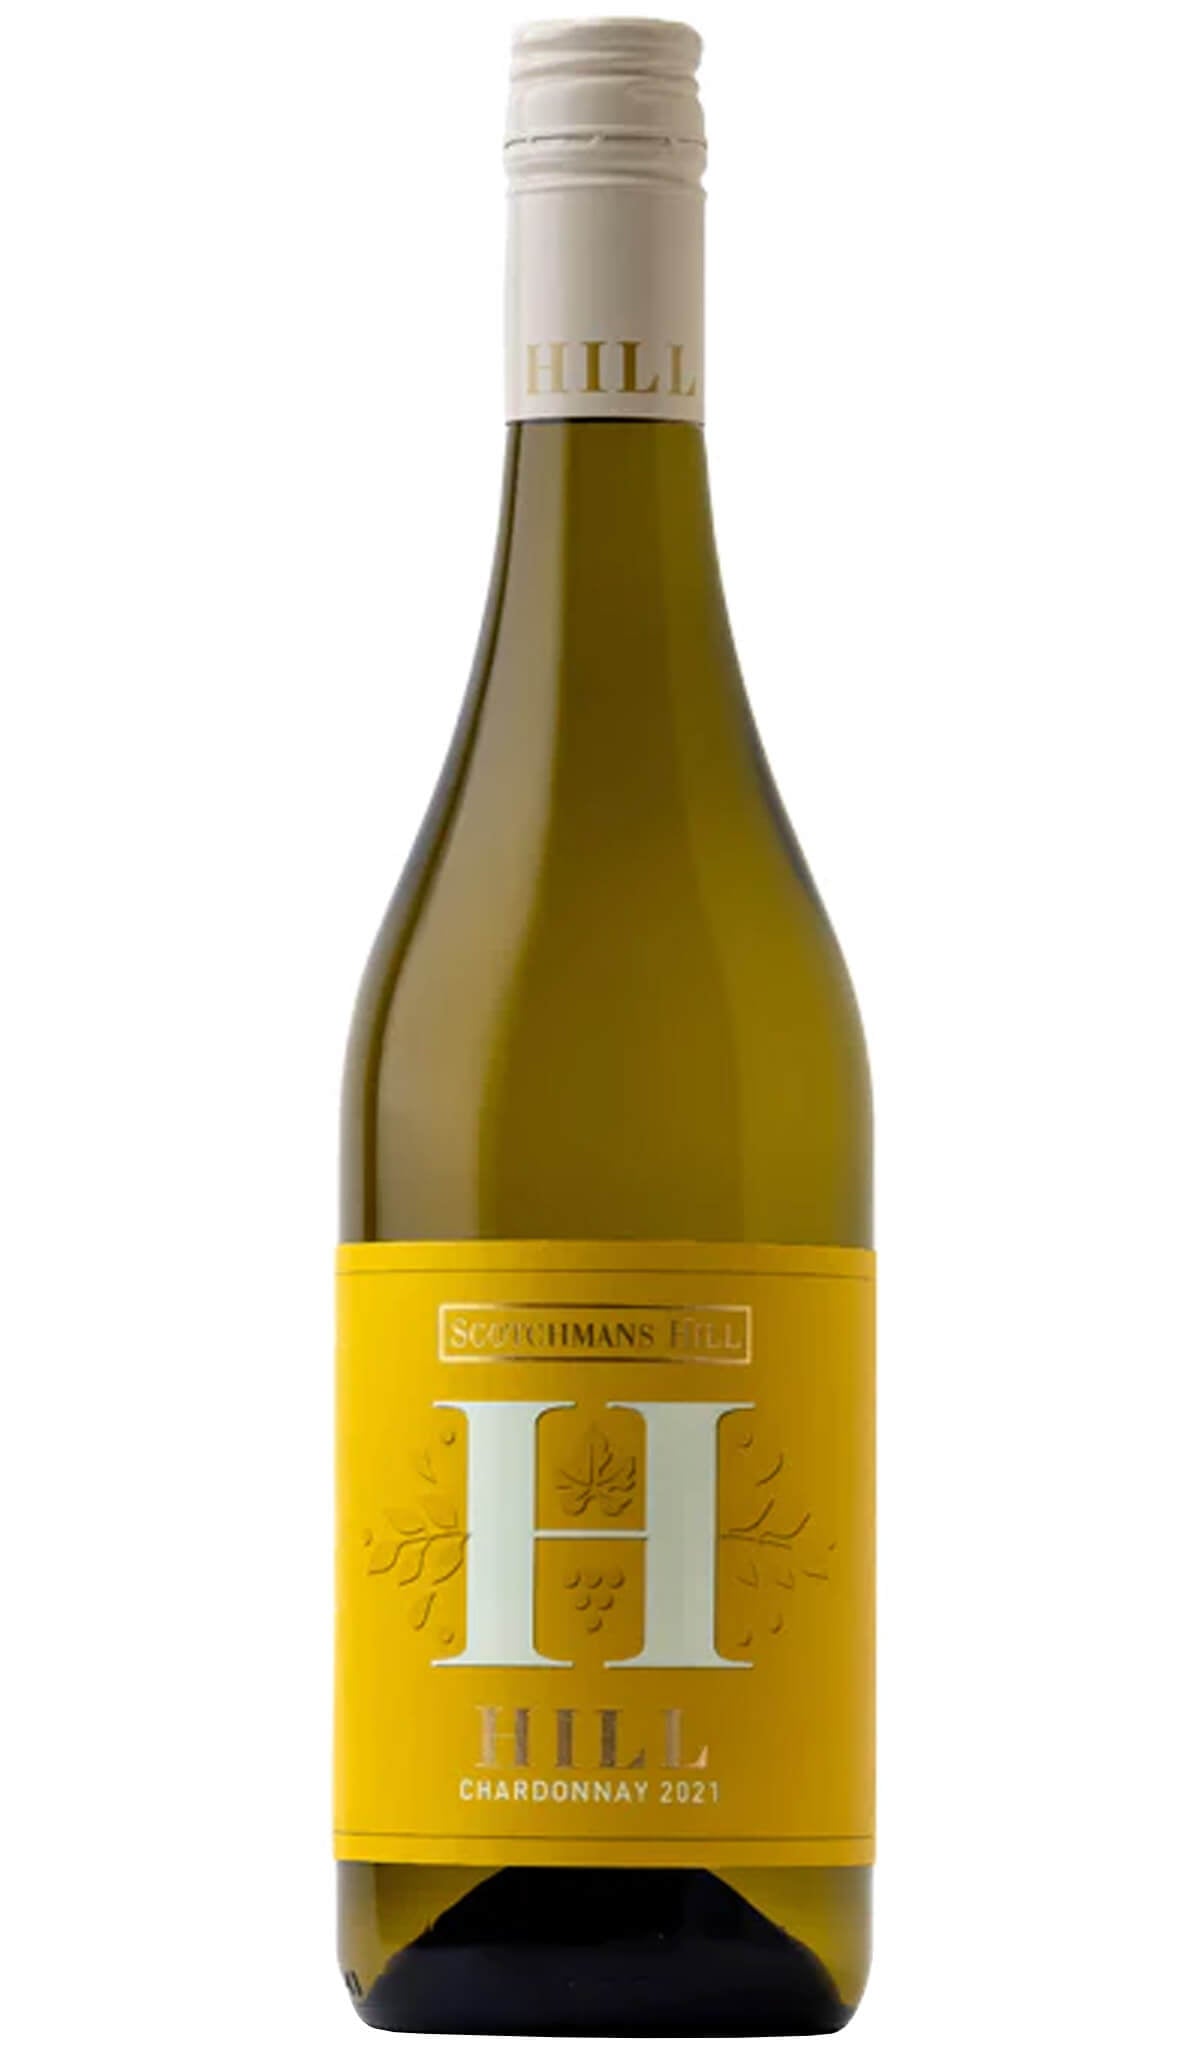 Find out more or buy Scotchmans Hill 'Hill' Chardonnay 2021 online at Wine Sellers Direct - Australia’s independent liquor specialists.